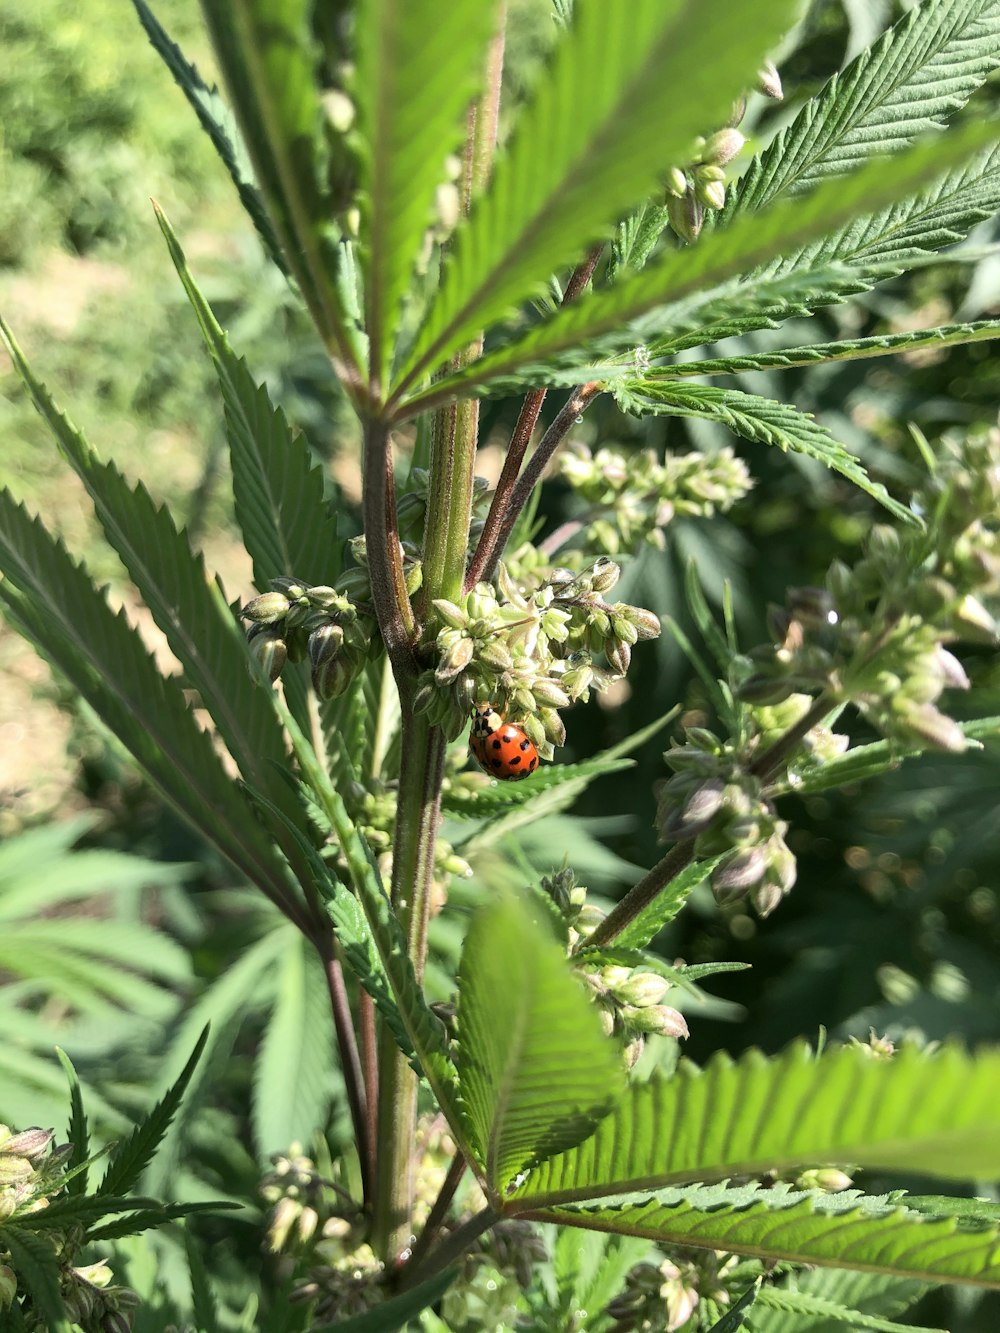 red and black ladybug on green plant during daytime